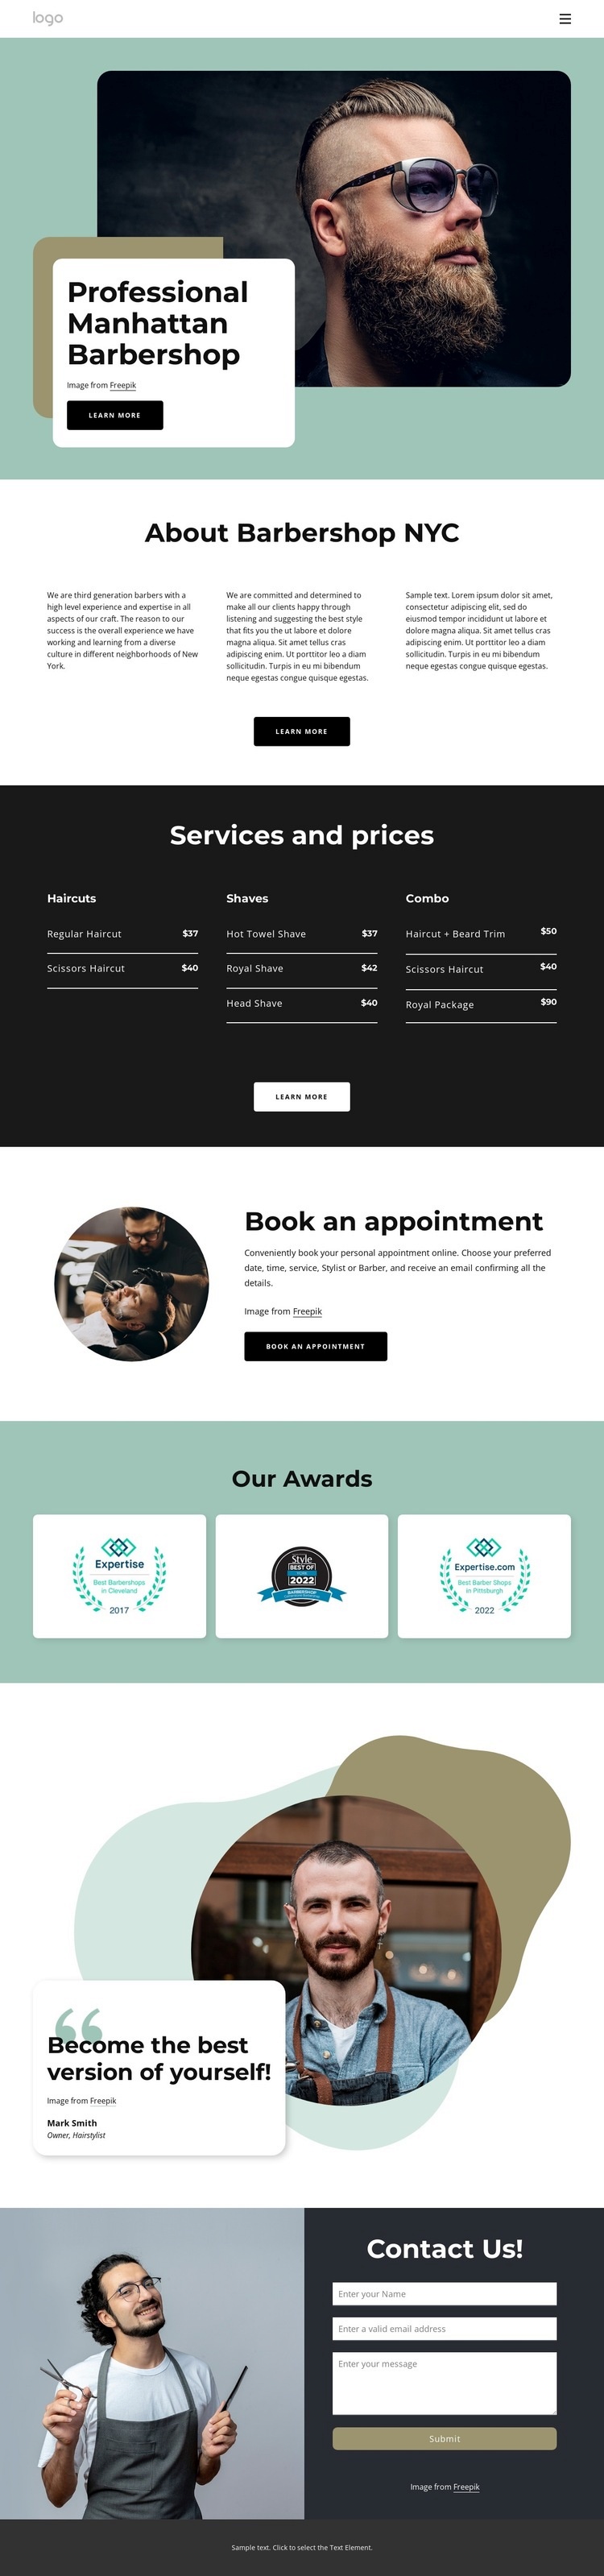 About Manhattan barbershop Html Code Example